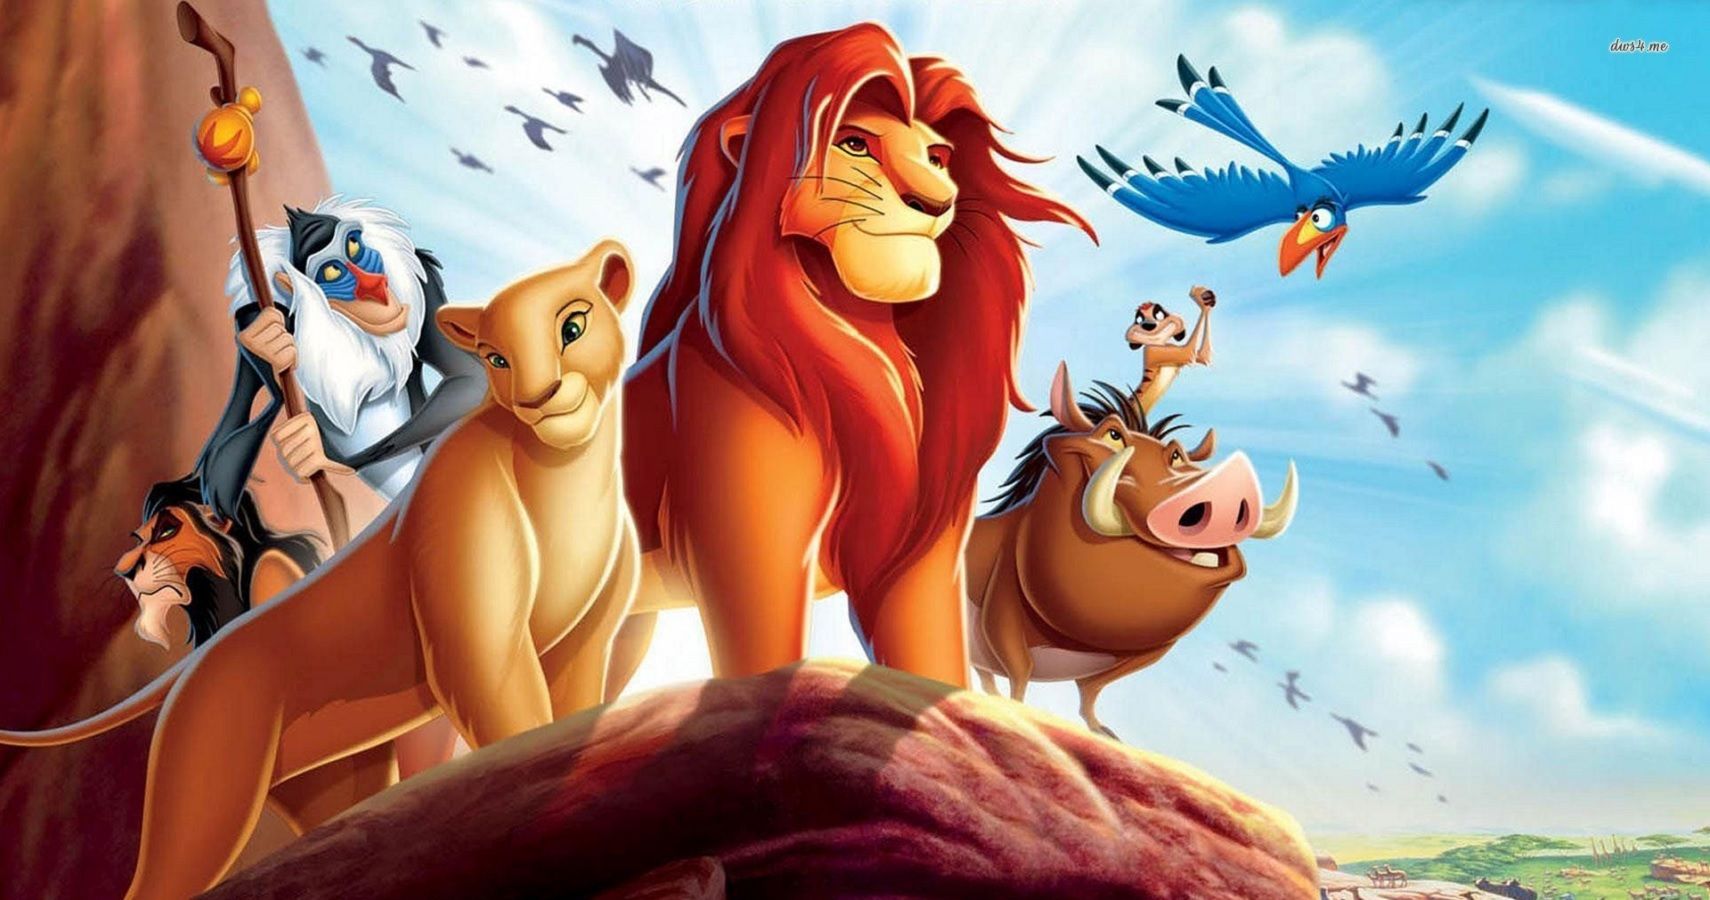 Ten Things We've Learned About Lions Since Disney's Original 'The